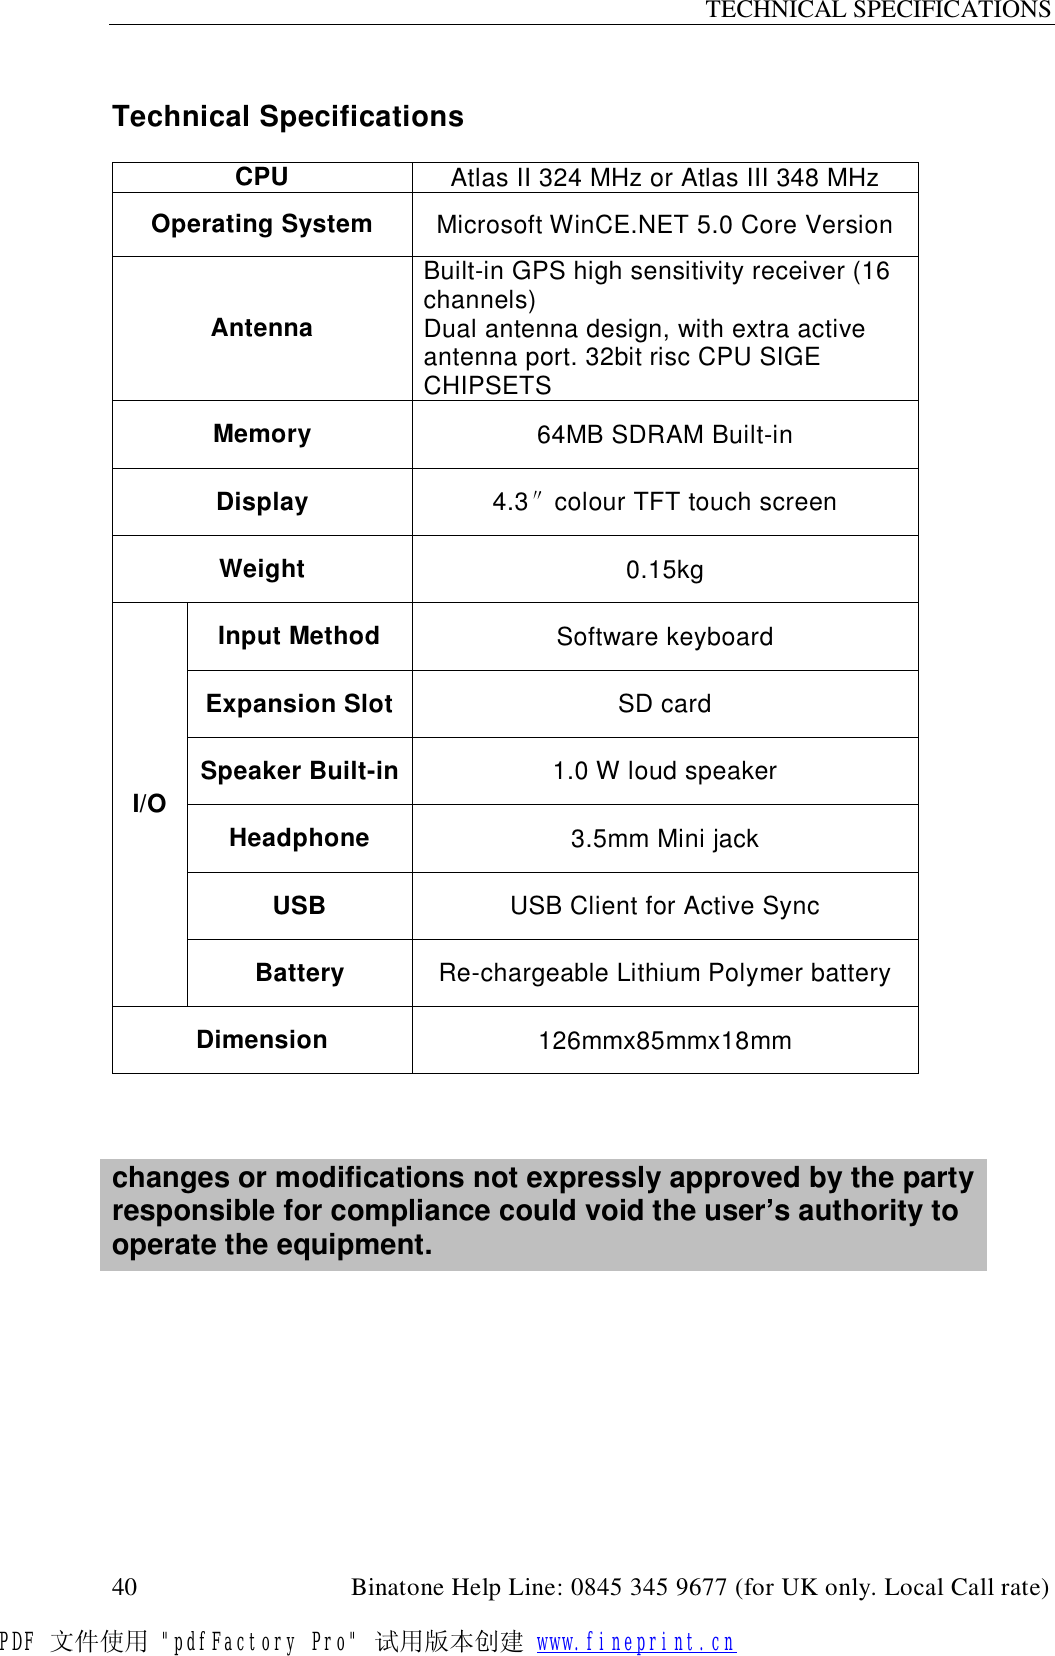 TECHNICAL SPECIFICATIONS  40                                         Binatone Help Line: 0845 345 9677 (for UK only. Local Call rate)  Technical Specifications  CPU  Atlas II 324 MHz or Atlas III 348 MHz Operating System  Microsoft WinCE.NET 5.0 Core Version Antenna Built-in GPS high sensitivity receiver (16 channels)  Dual antenna design, with extra active antenna port. 32bit risc CPU SIGE CHIPSETS Memory  64MB SDRAM Built-in Display  4.3″colour TFT touch screen Weight  0.15kg Input Method  Software keyboard Expansion Slot SD card Speaker Built-in 1.0 W loud speaker Headphone  3.5mm Mini jack USB  USB Client for Active Sync I/O Battery  Re-chargeable Lithium Polymer battery Dimension  126mmx85mmx18mm    changes or modifications not expressly approved by the party responsible for compliance could void the user’s authority to operate the equipment.          PDF 文件使用 &quot;pdfFactory Pro&quot; 试用版本创建 www.fineprint.cn